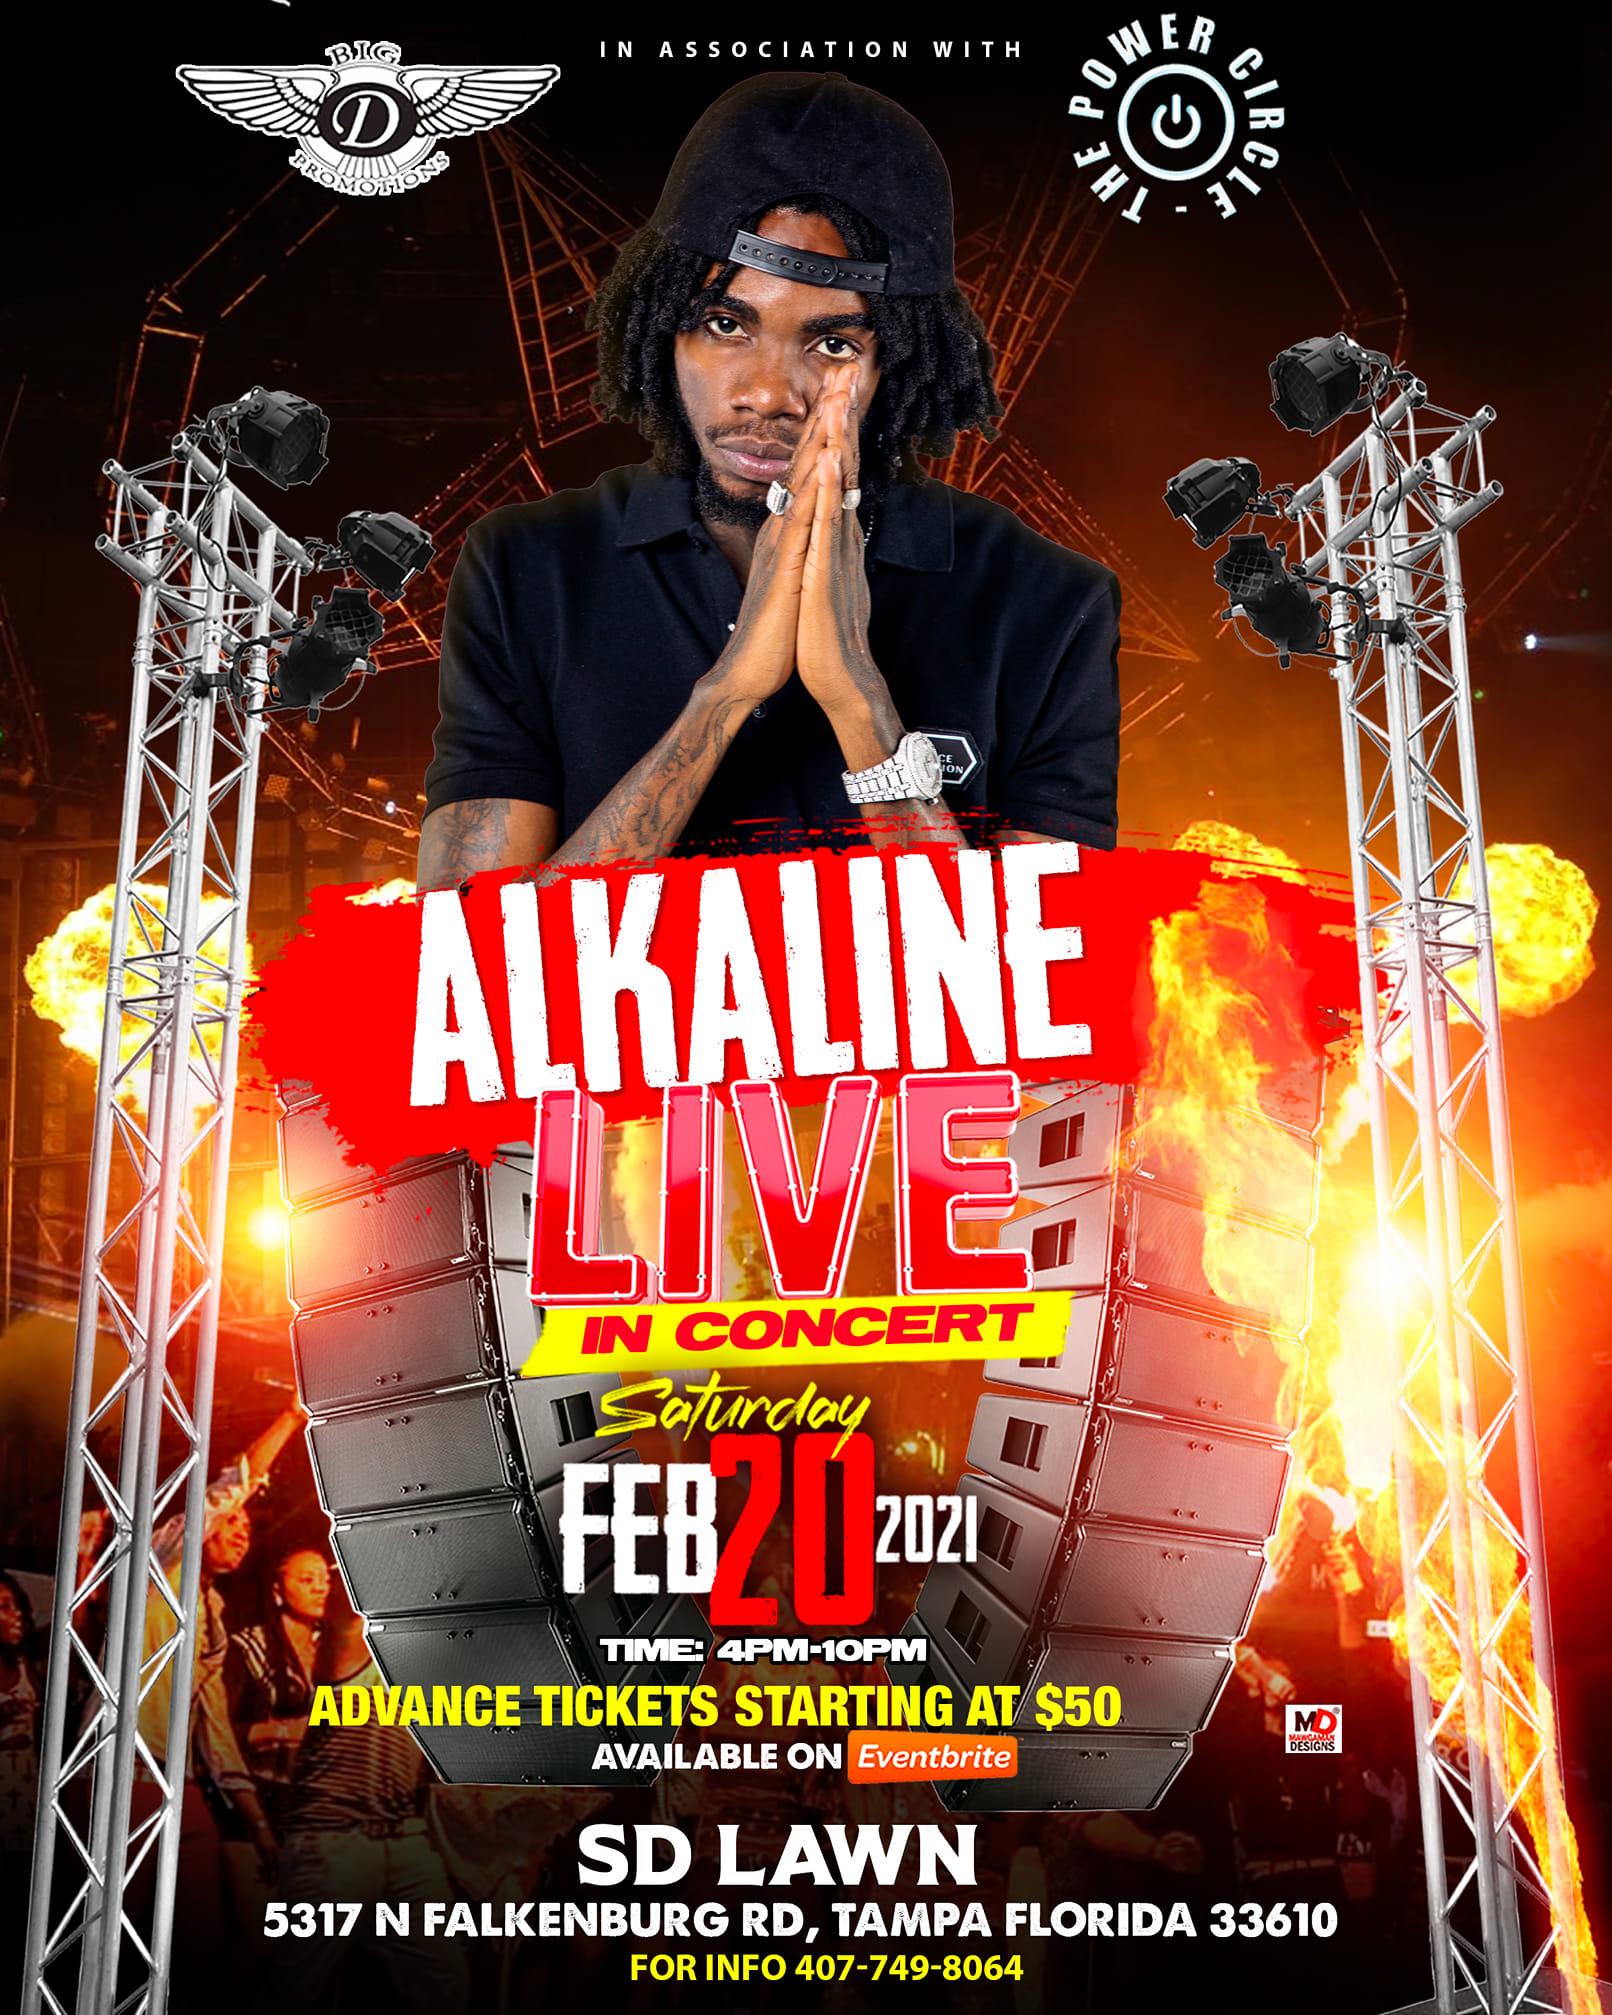 ALKALINE LIVE IN CONCERT TAMPA, FLORIDA at Sd Banquet Hall Llc on Feb